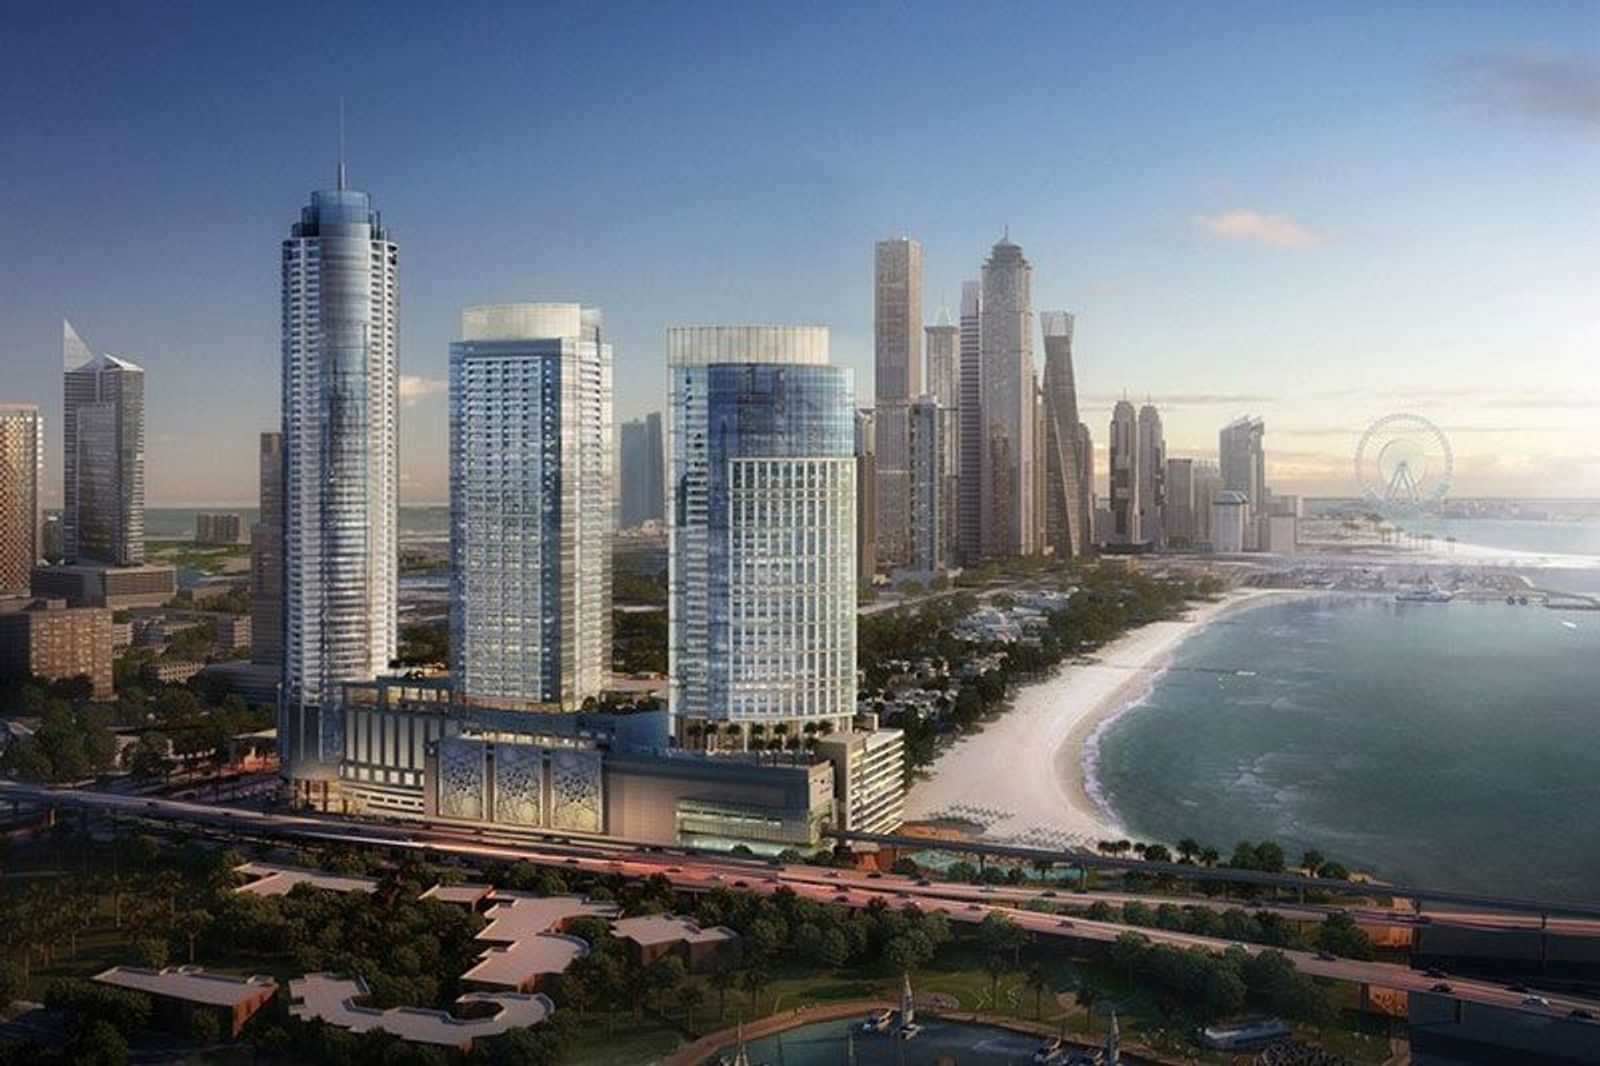 Render of the Palm Beach Towers residential complex in Dubai